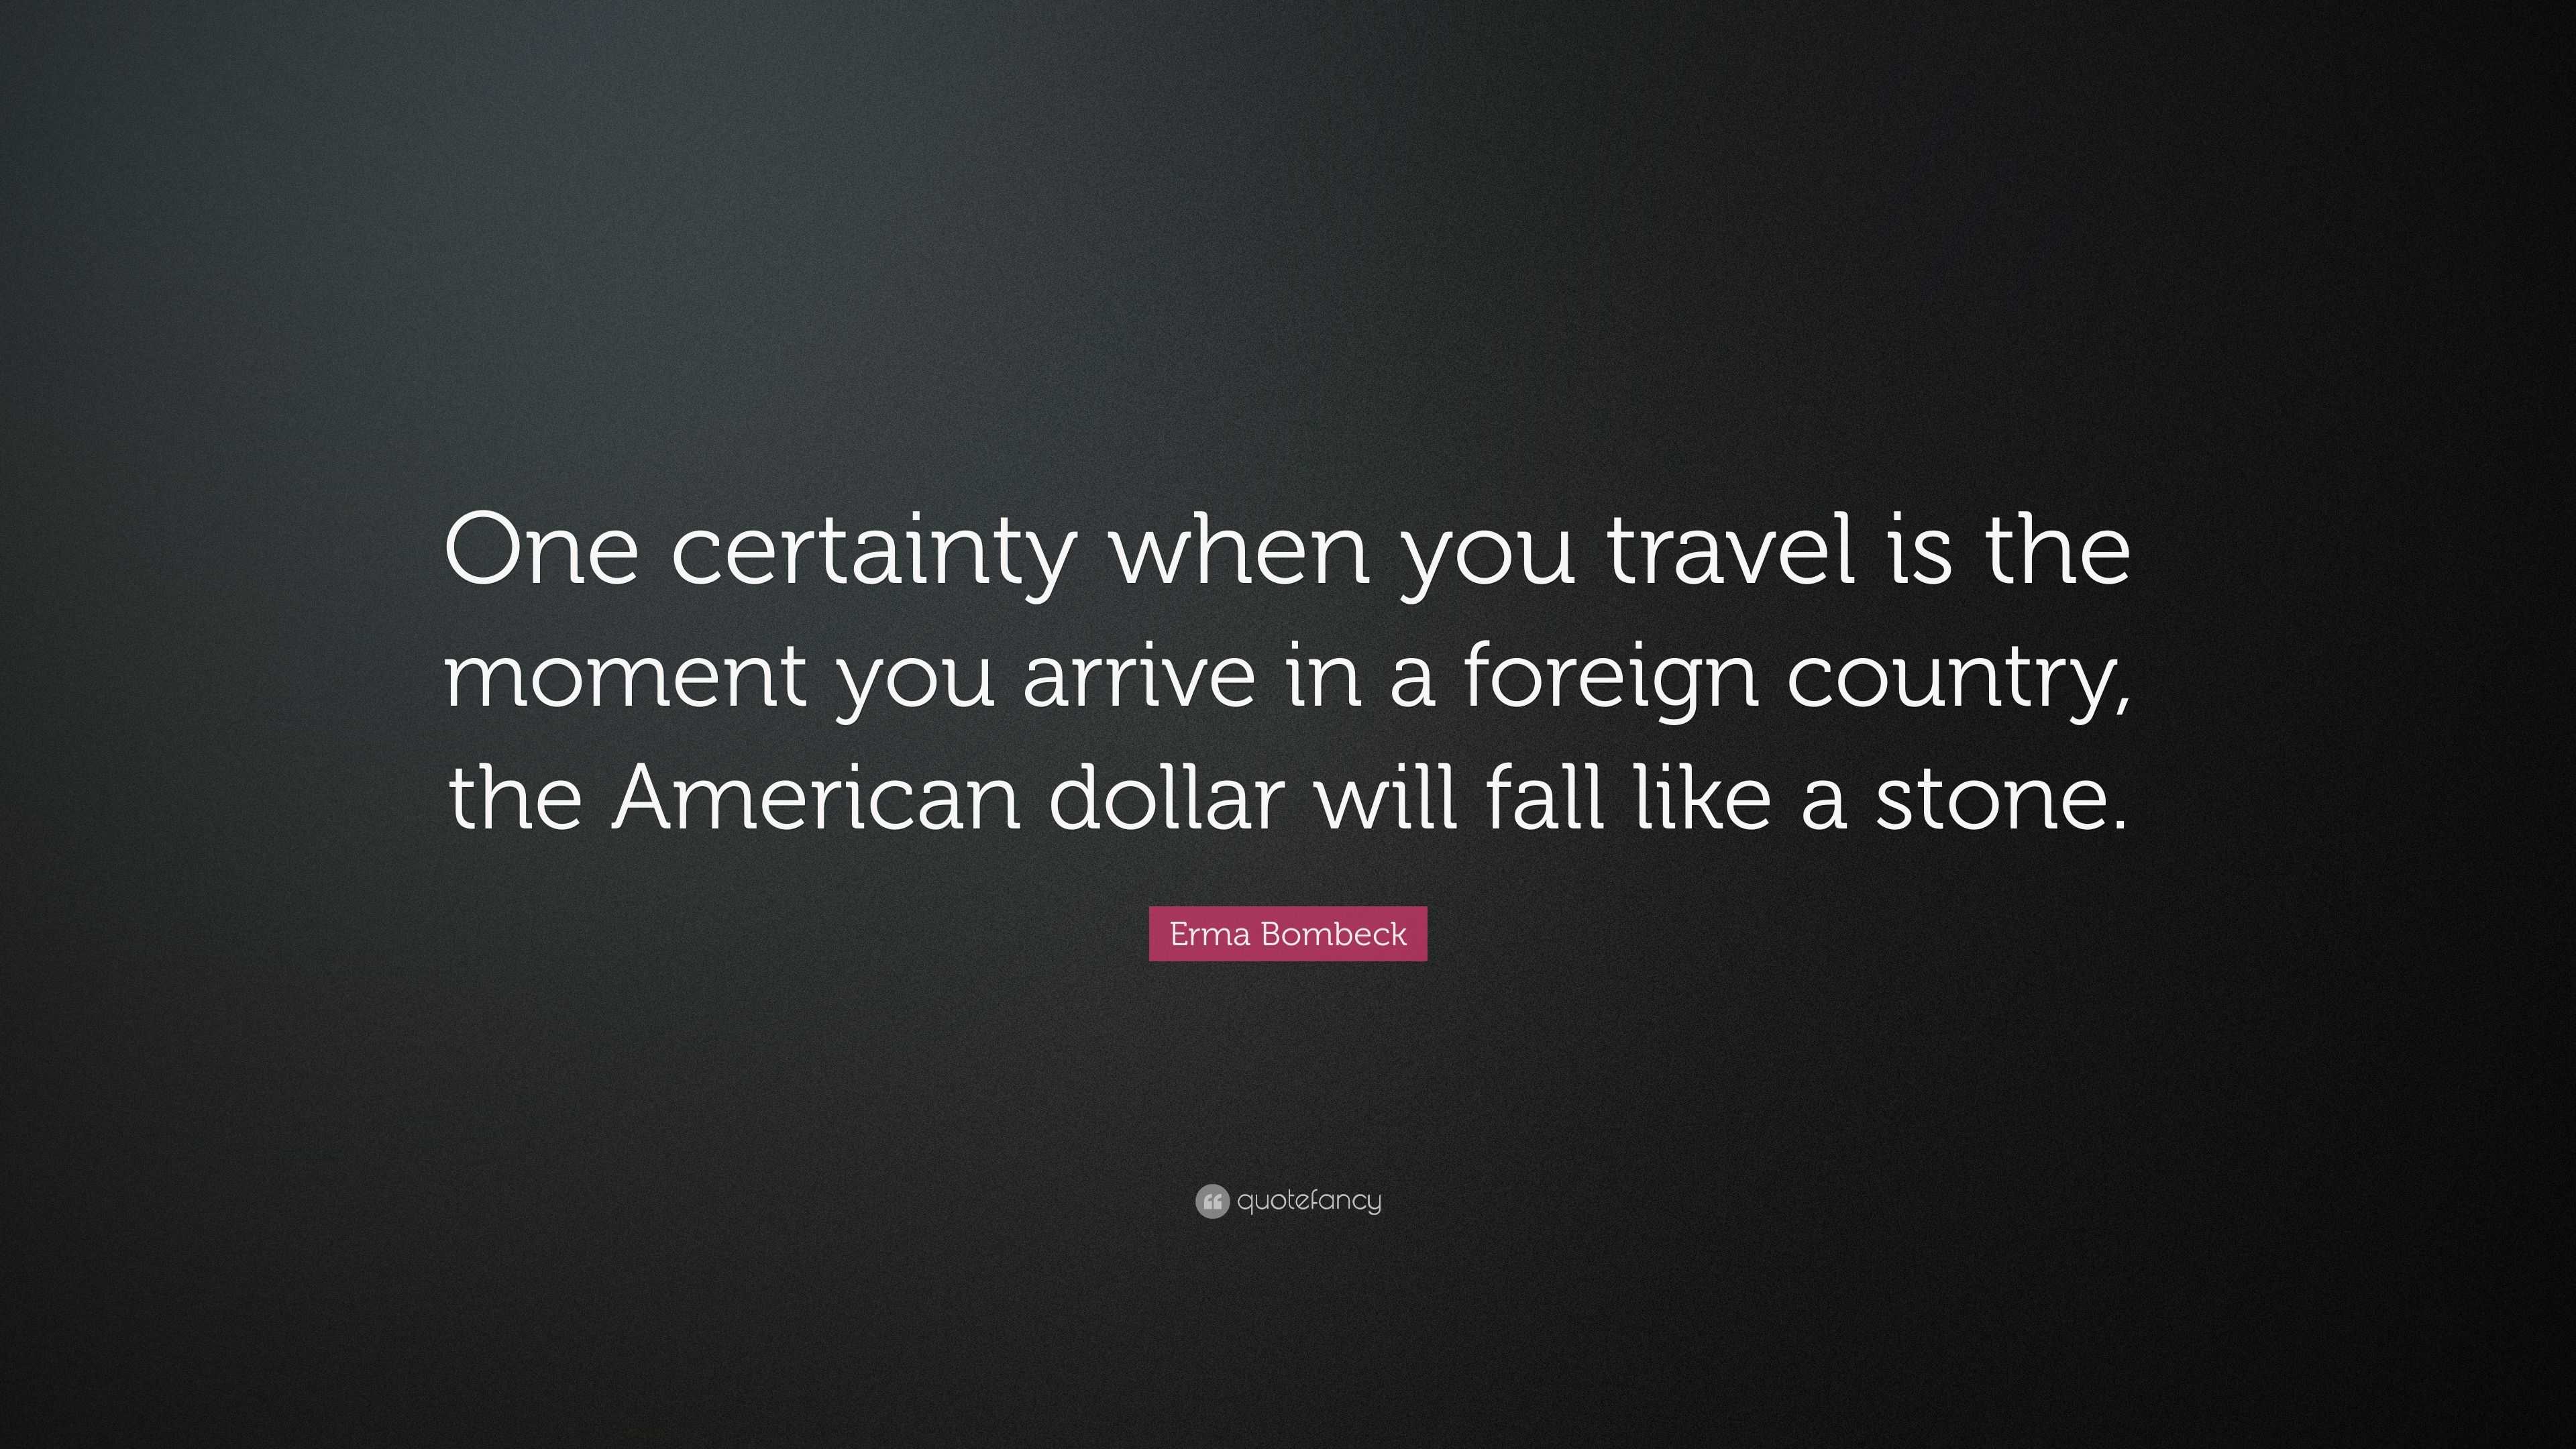 Erma Bombeck Quote: “One certainty when you travel is the moment you ...